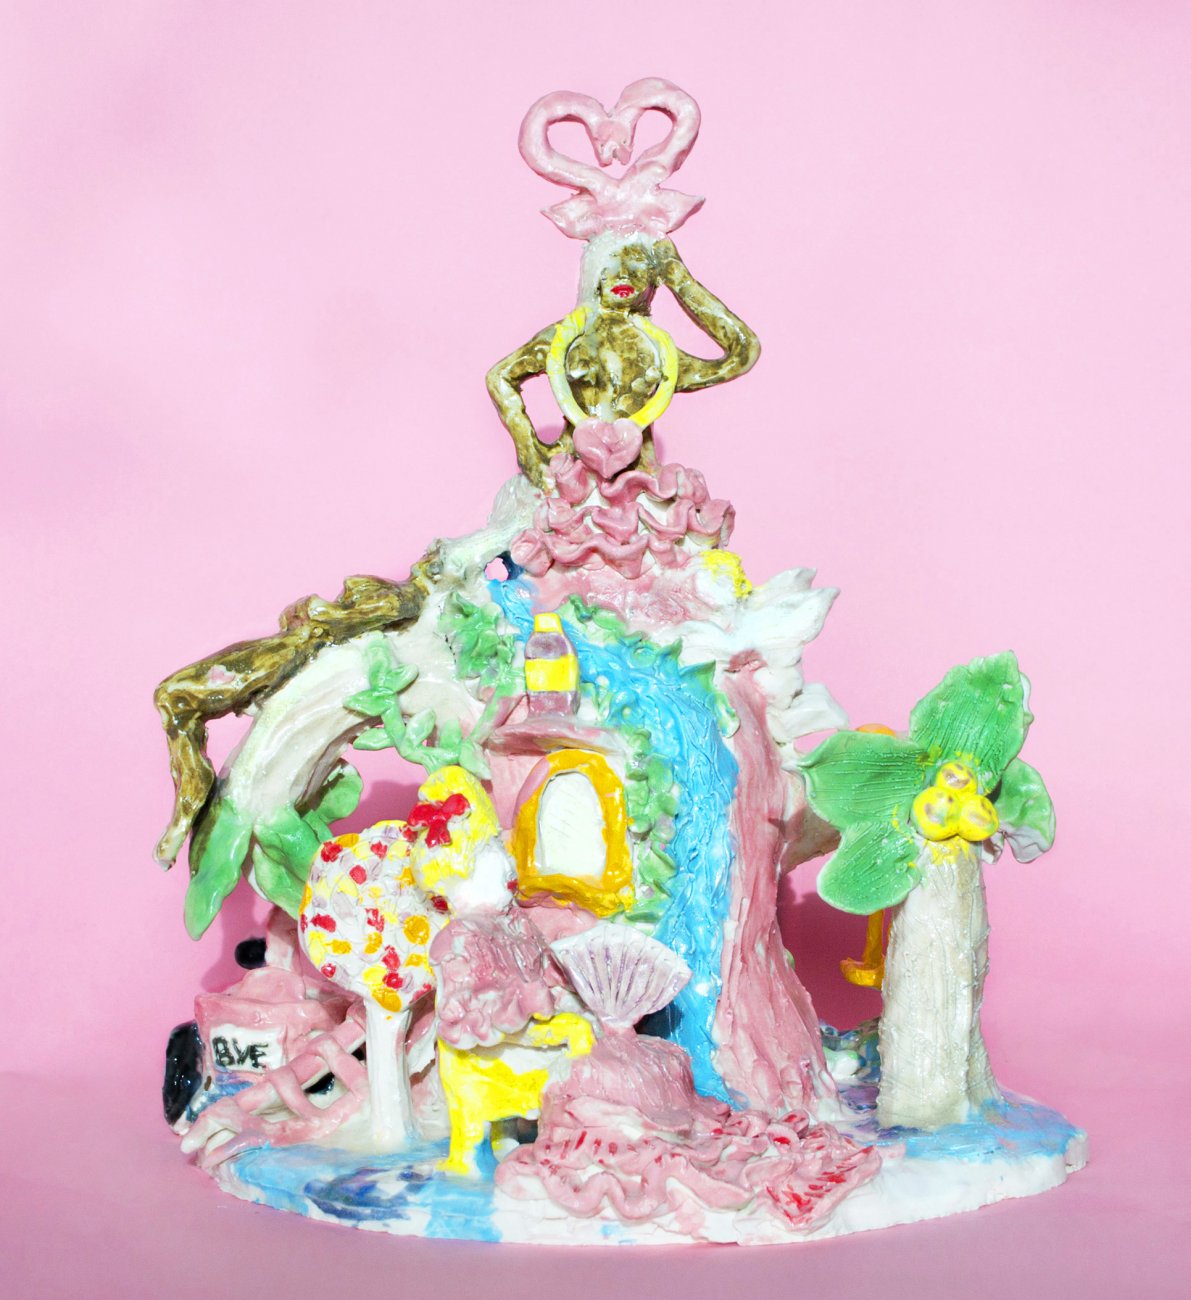 Yvette Mayorga’s porcelain sculpture sits in the center of a bright pink background.